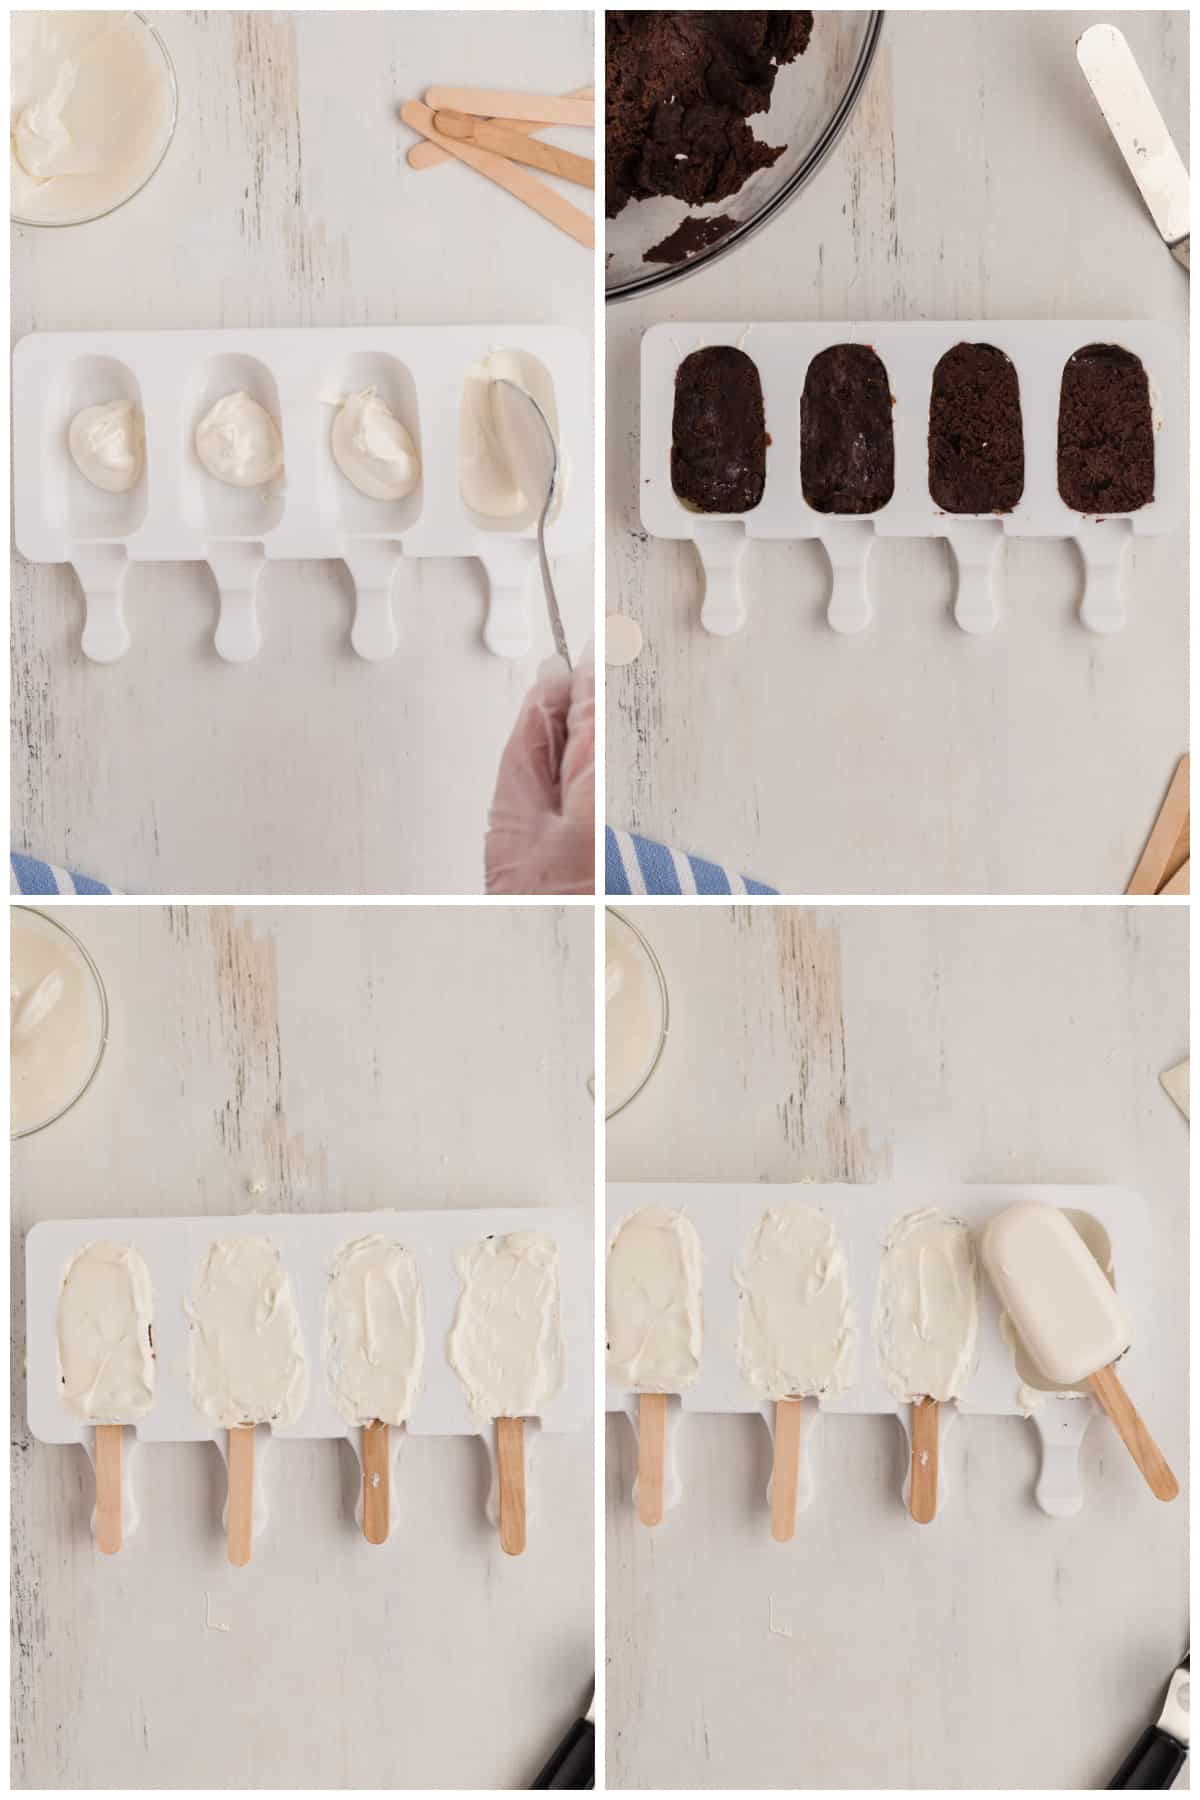 A collage of four images showing how to form and shape cakesicles.